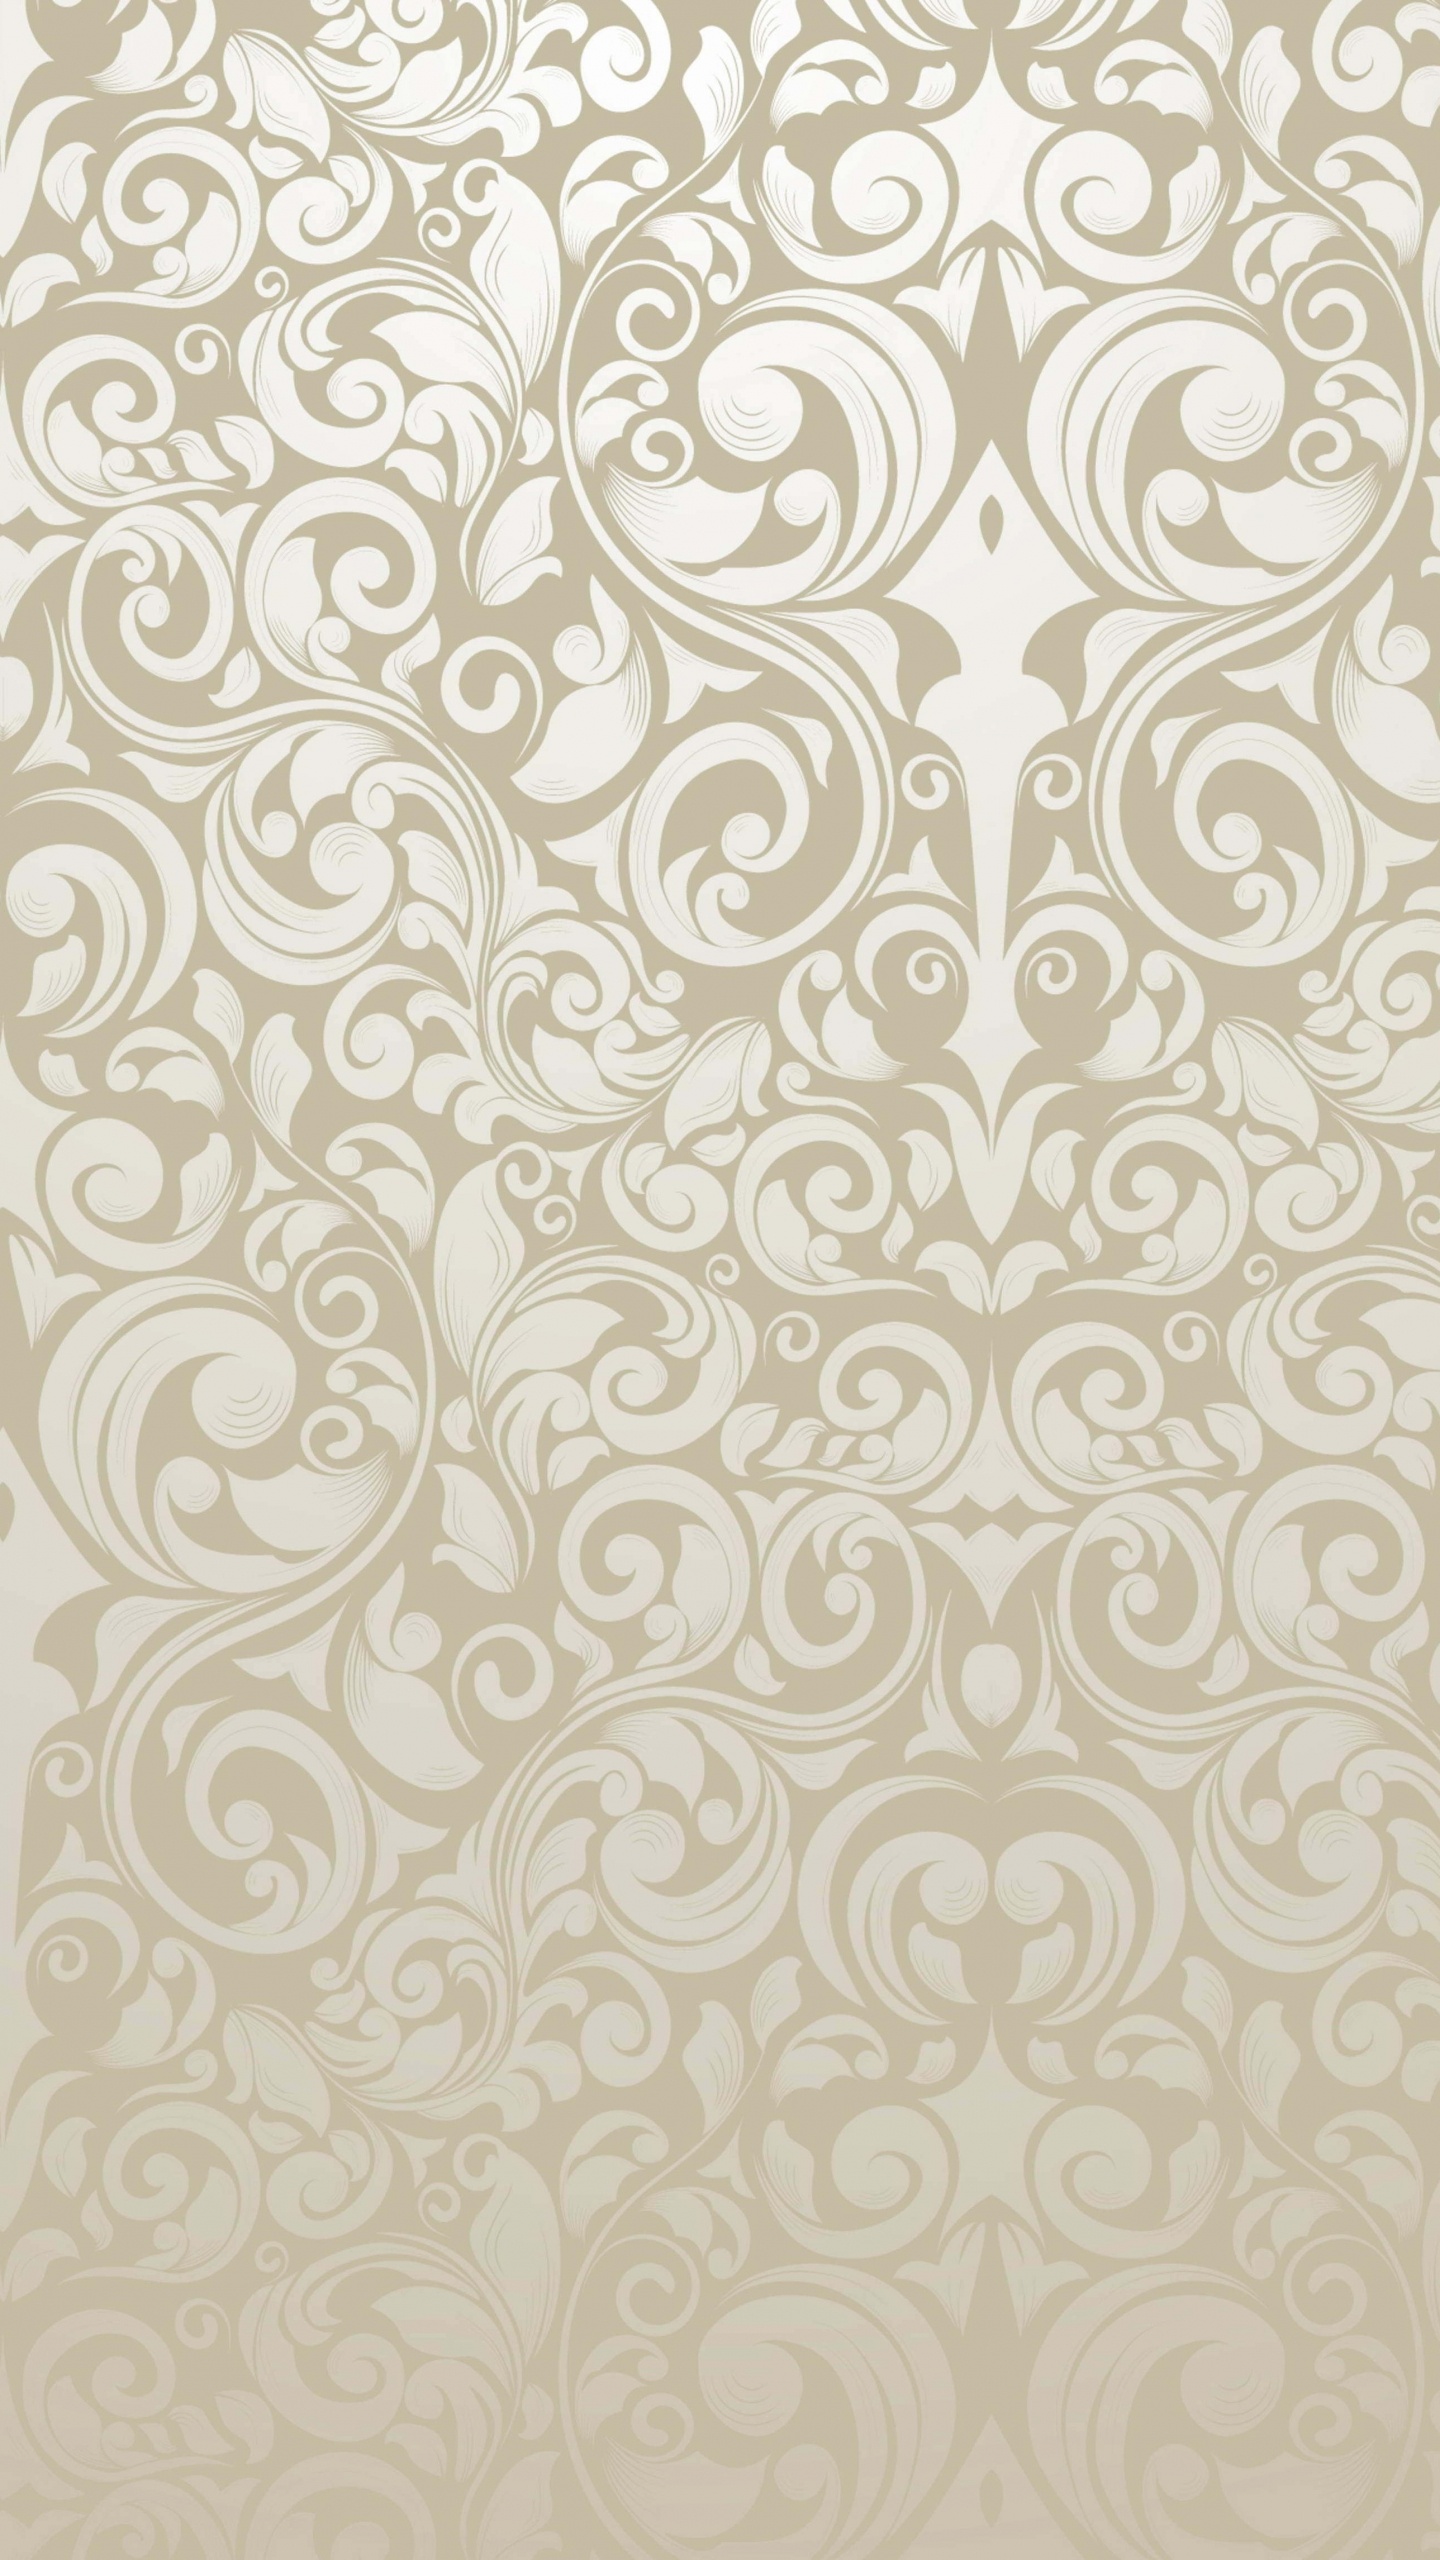 White and Black Floral Textile. Wallpaper in 1440x2560 Resolution